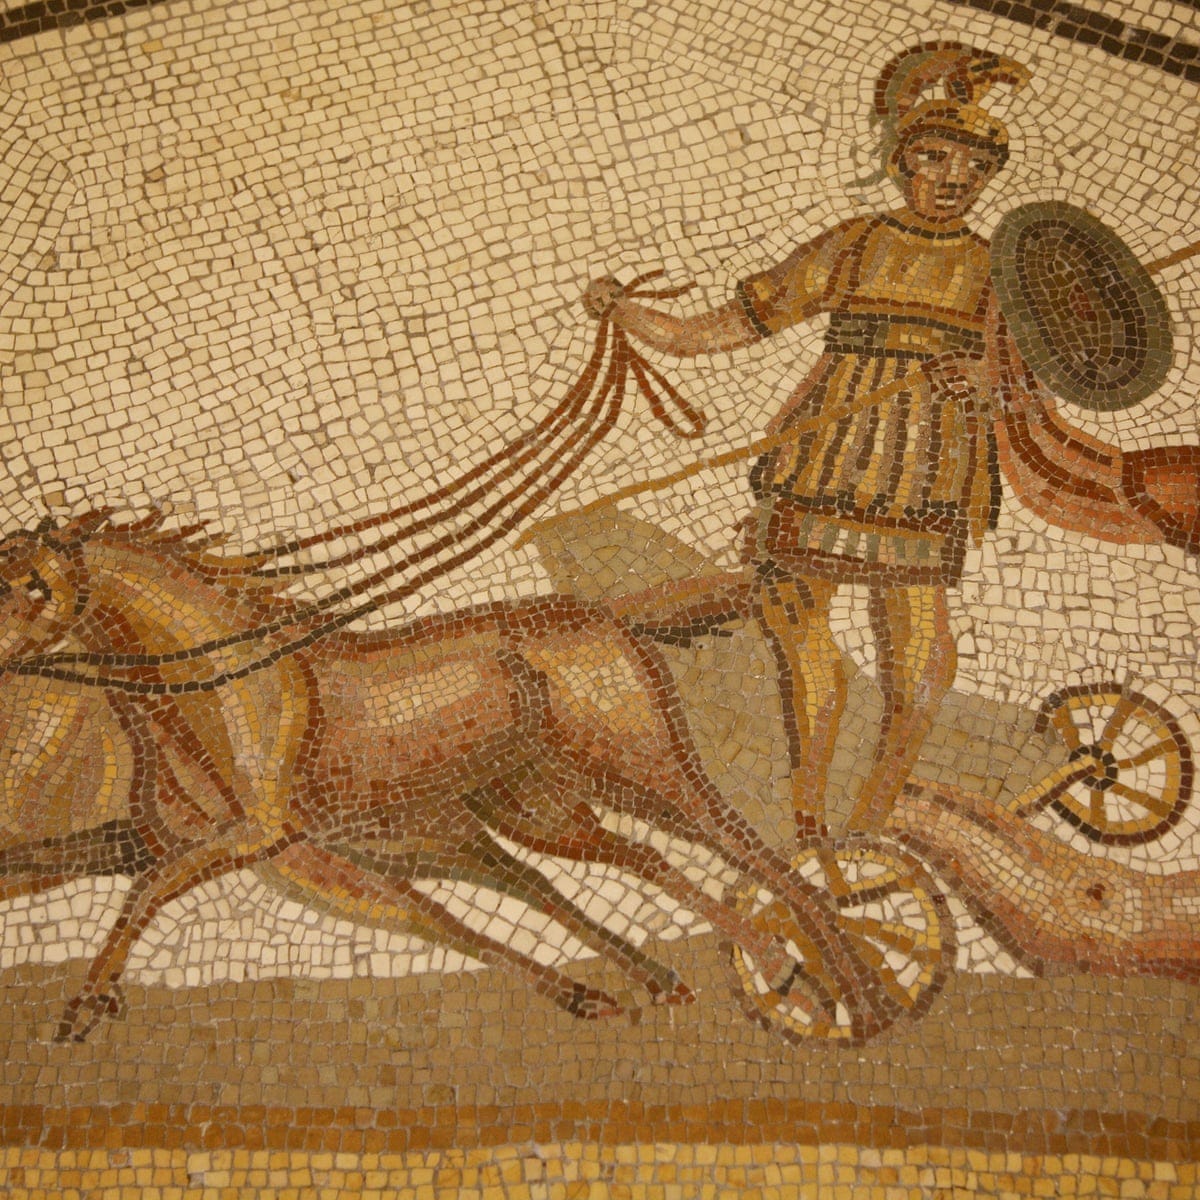 Achilles is brutal, vain, pitiless – and a true hero | Homer | The Guardian